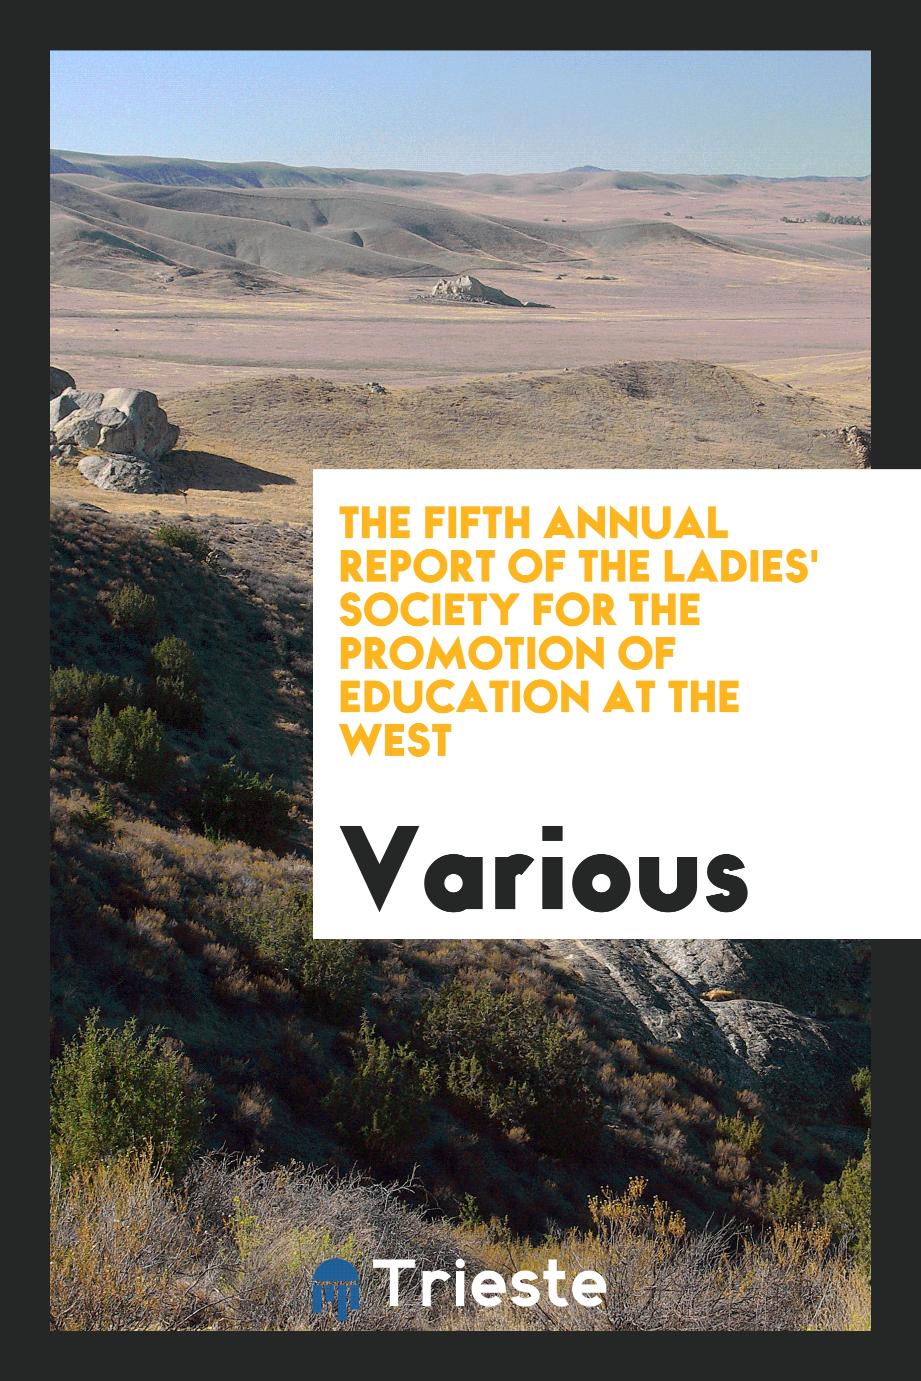 The fifth Annual report of the Ladies' Society for the Promotion of Education at the West